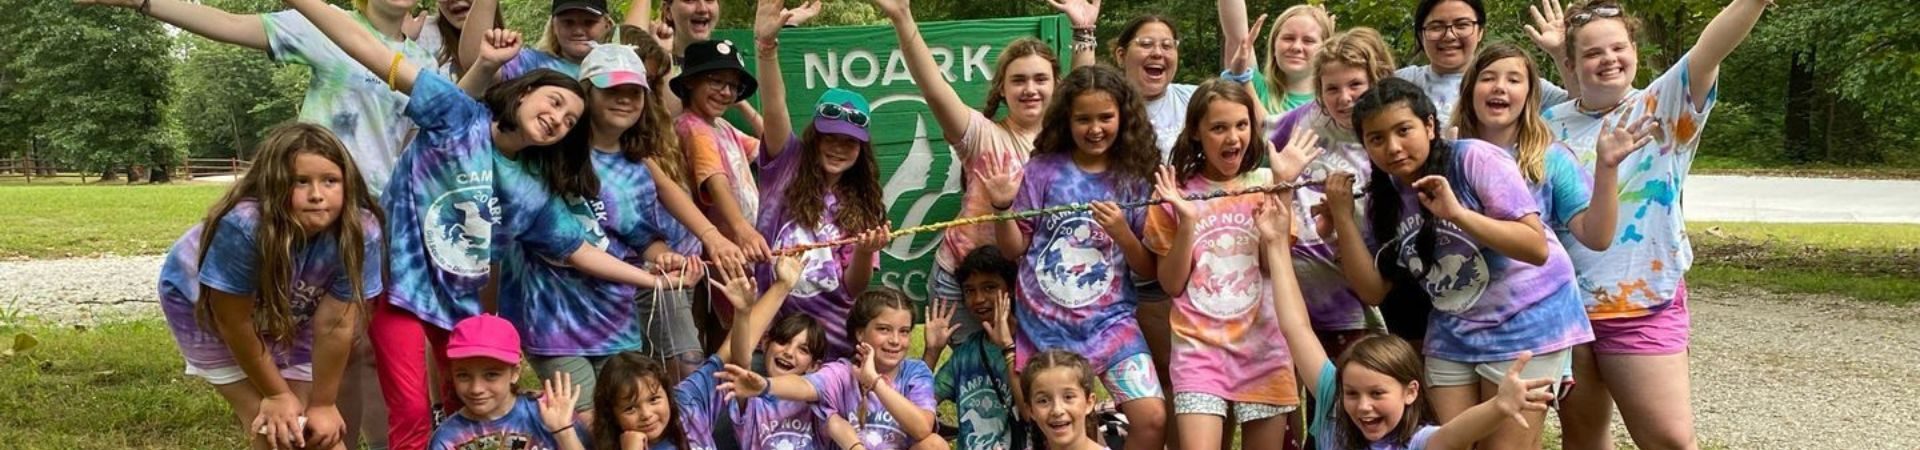  large group of girls in tie-dye summer camp t-shirts posed in front of Camp NOARK sign 